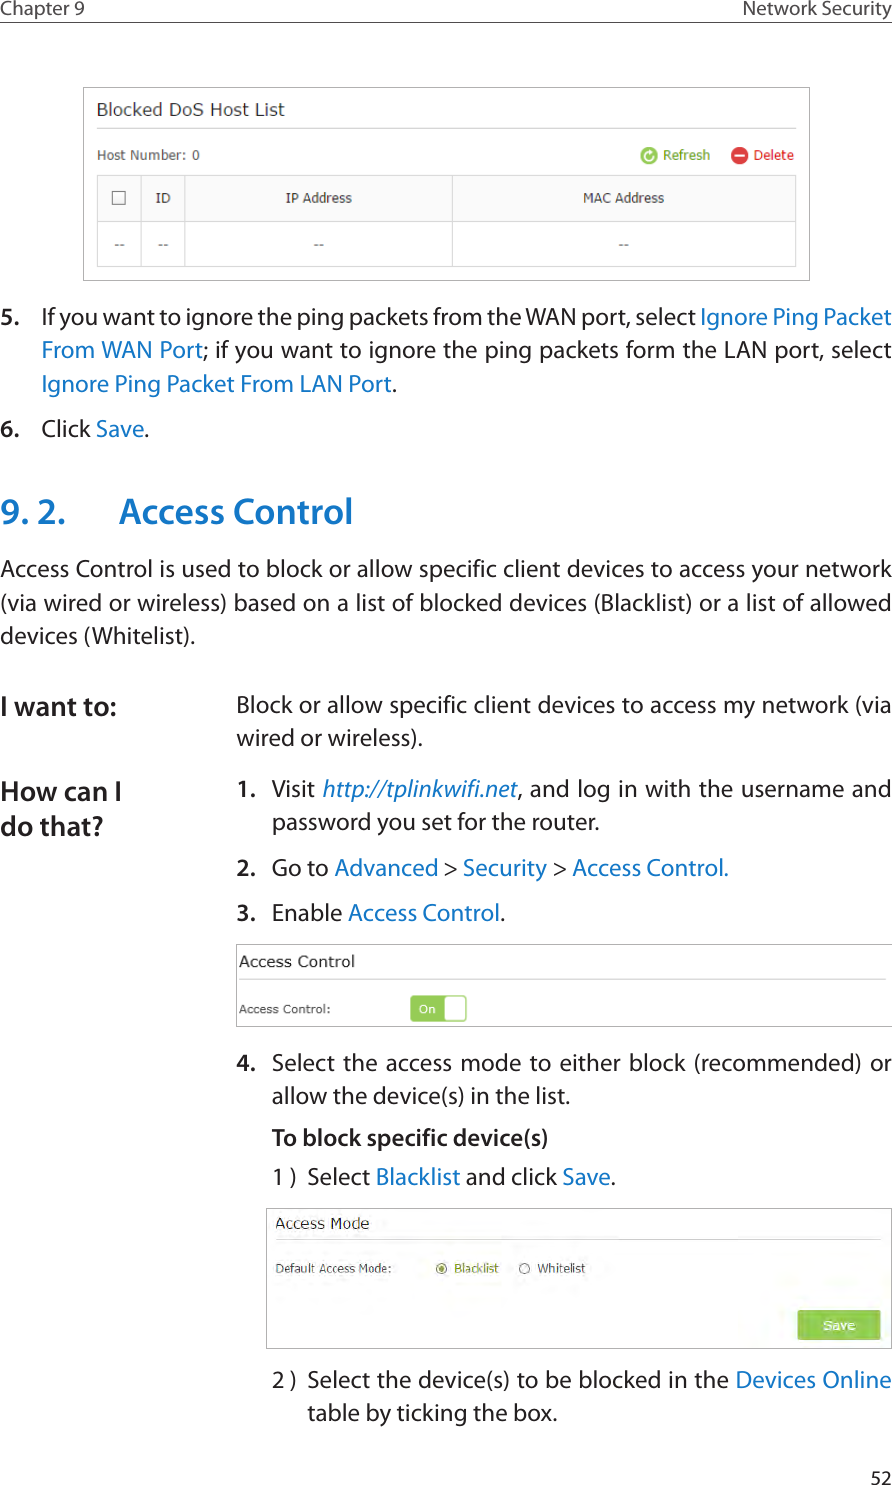 52Chapter 9 Network Security5.  If you want to ignore the ping packets from the WAN port, select Ignore Ping Packet From WAN Port; if you want to ignore the ping packets form the LAN port, select Ignore Ping Packet From LAN Port.6.  Click Save.9. 2.  Access ControlAccess Control is used to block or allow specific client devices to access your network (via wired or wireless) based on a list of blocked devices (Blacklist) or a list of allowed devices (Whitelist).Block or allow specific client devices to access my network (via wired or wireless).1.  Visit http://tplinkwifi.net, and log in with the username and password you set for the router.2.  Go to Advanced &gt; Security &gt; Access Control.3.  Enable Access Control.4.  Select the access mode to either block (recommended) or allow the device(s) in the list.To block specific device(s)1 )  Select Blacklist and click Save.2 )  Select the device(s) to be blocked in the Devices Online table by ticking the box.I want to:How can I do that?